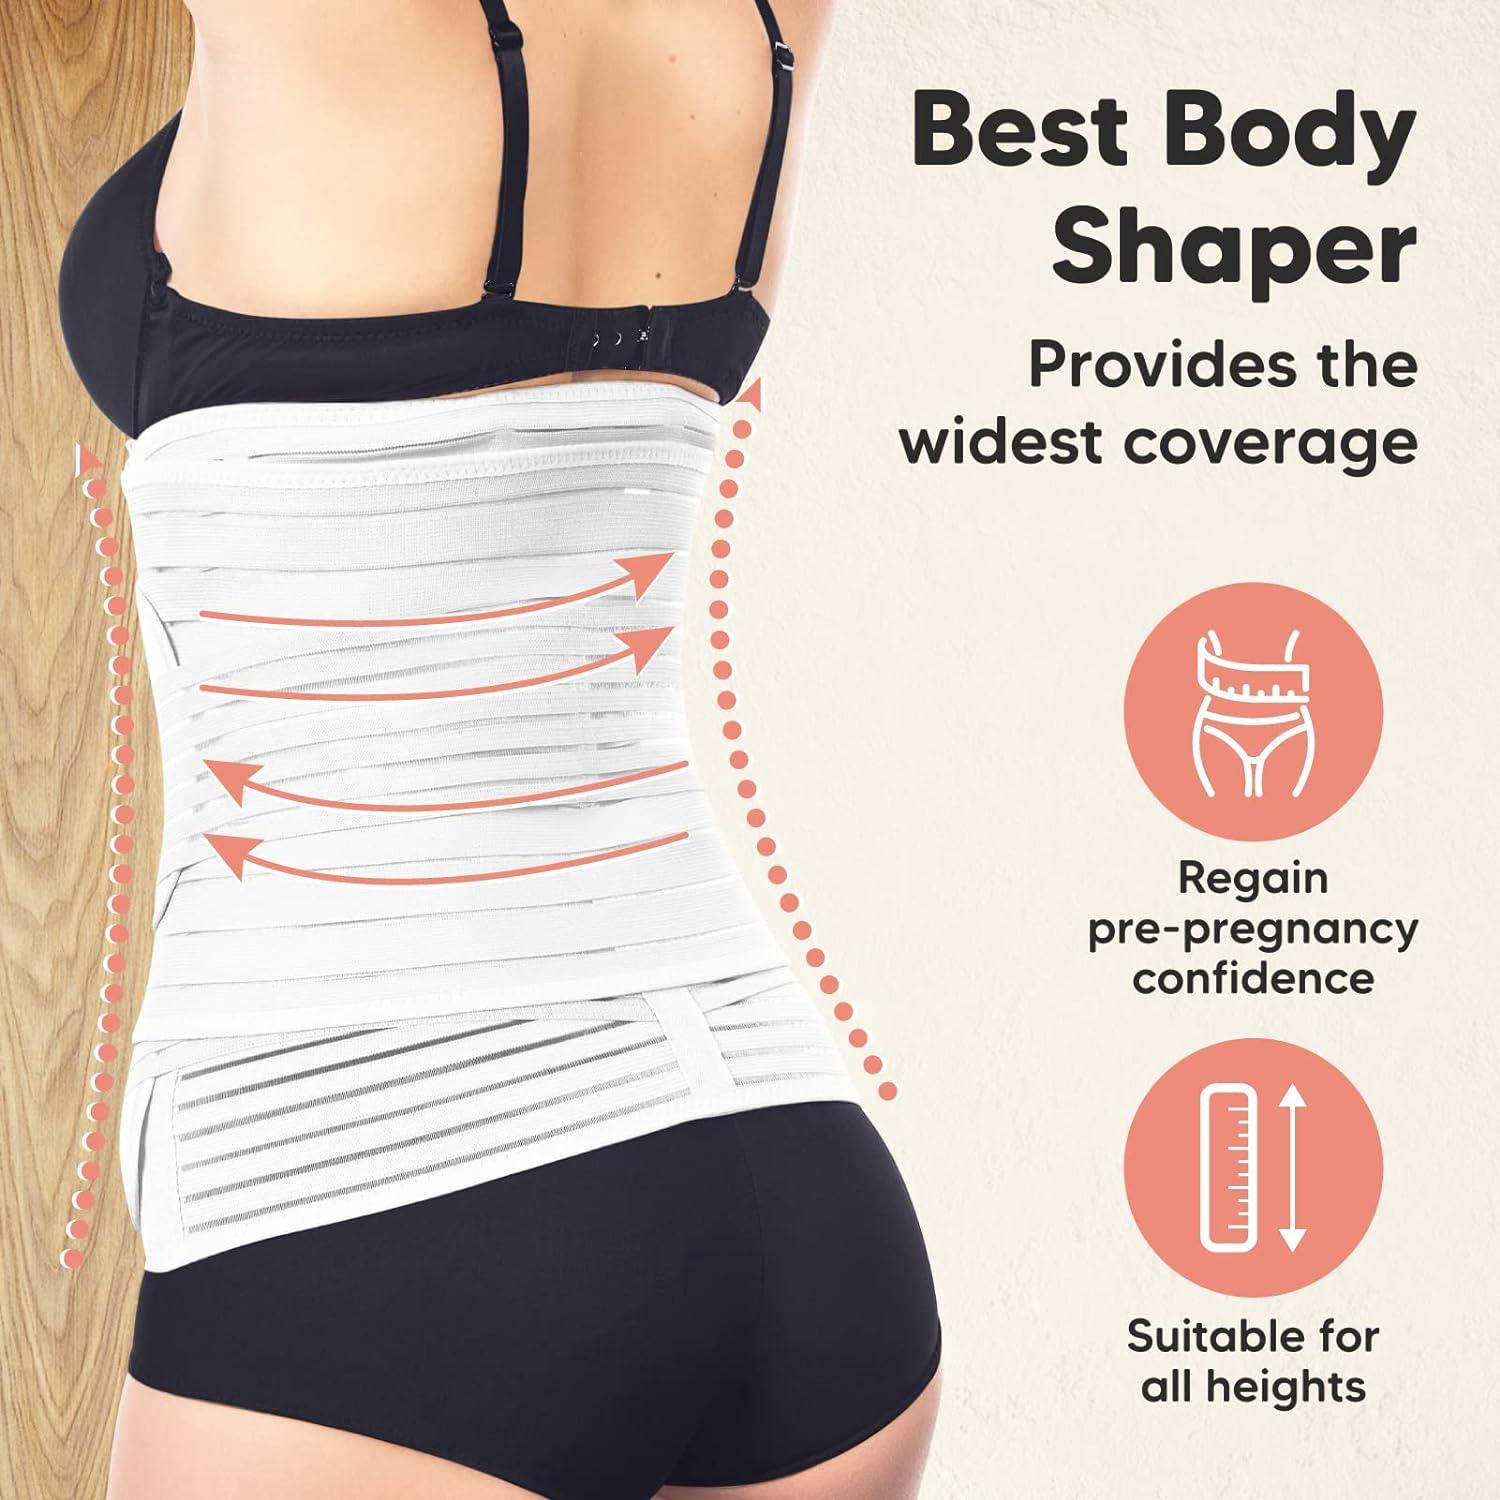  3 in 1 Postpartum Belly Support Recovery Wrap